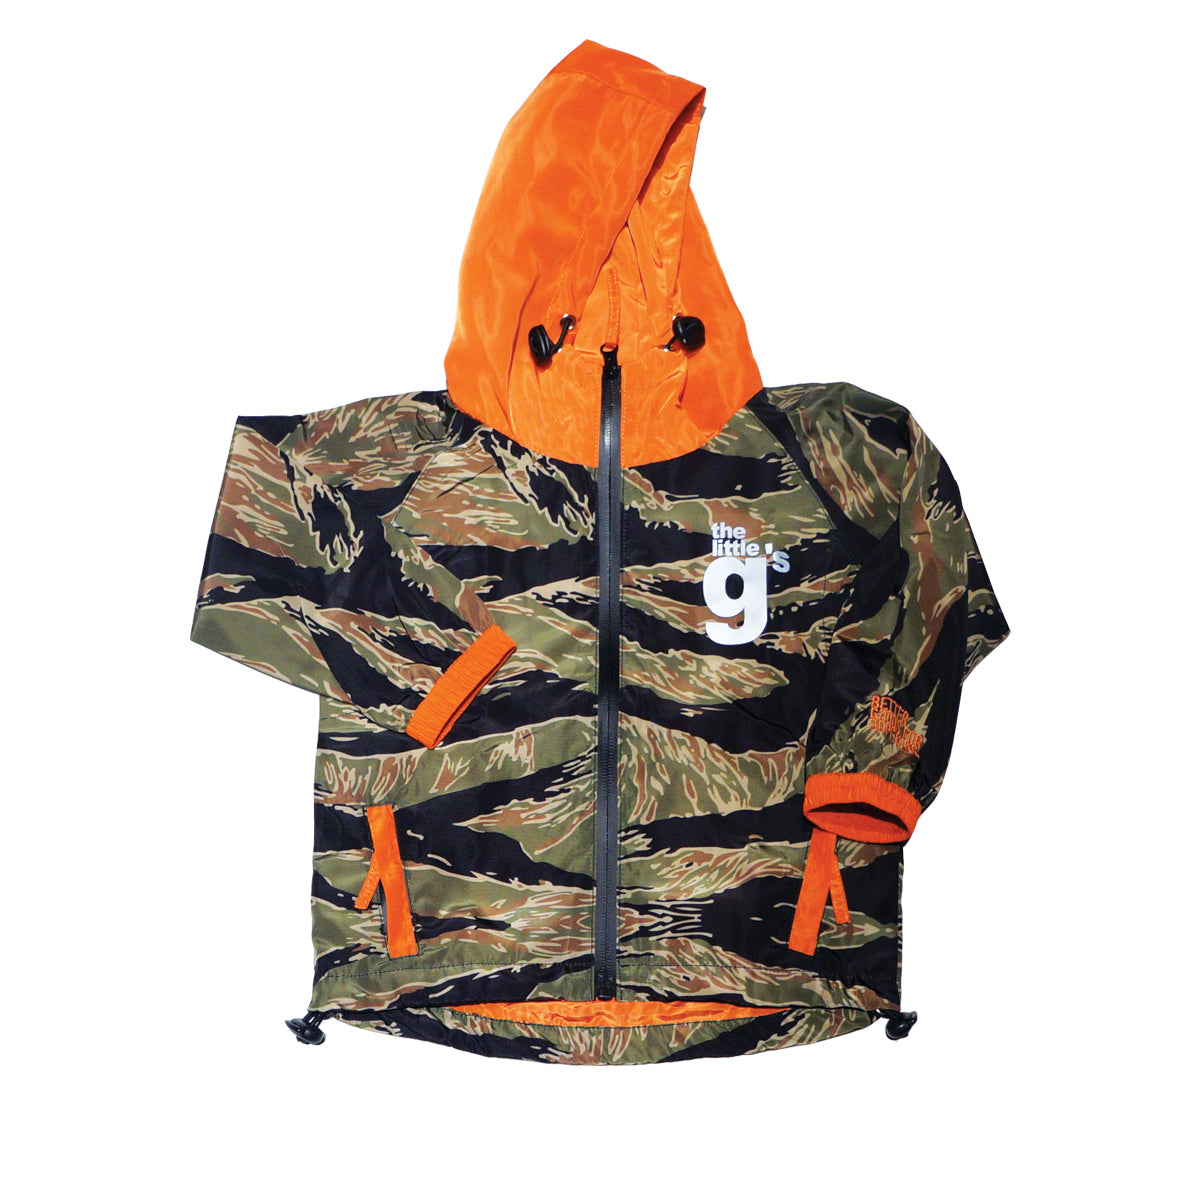 The Little g's Track Suit (Tiger Camo)